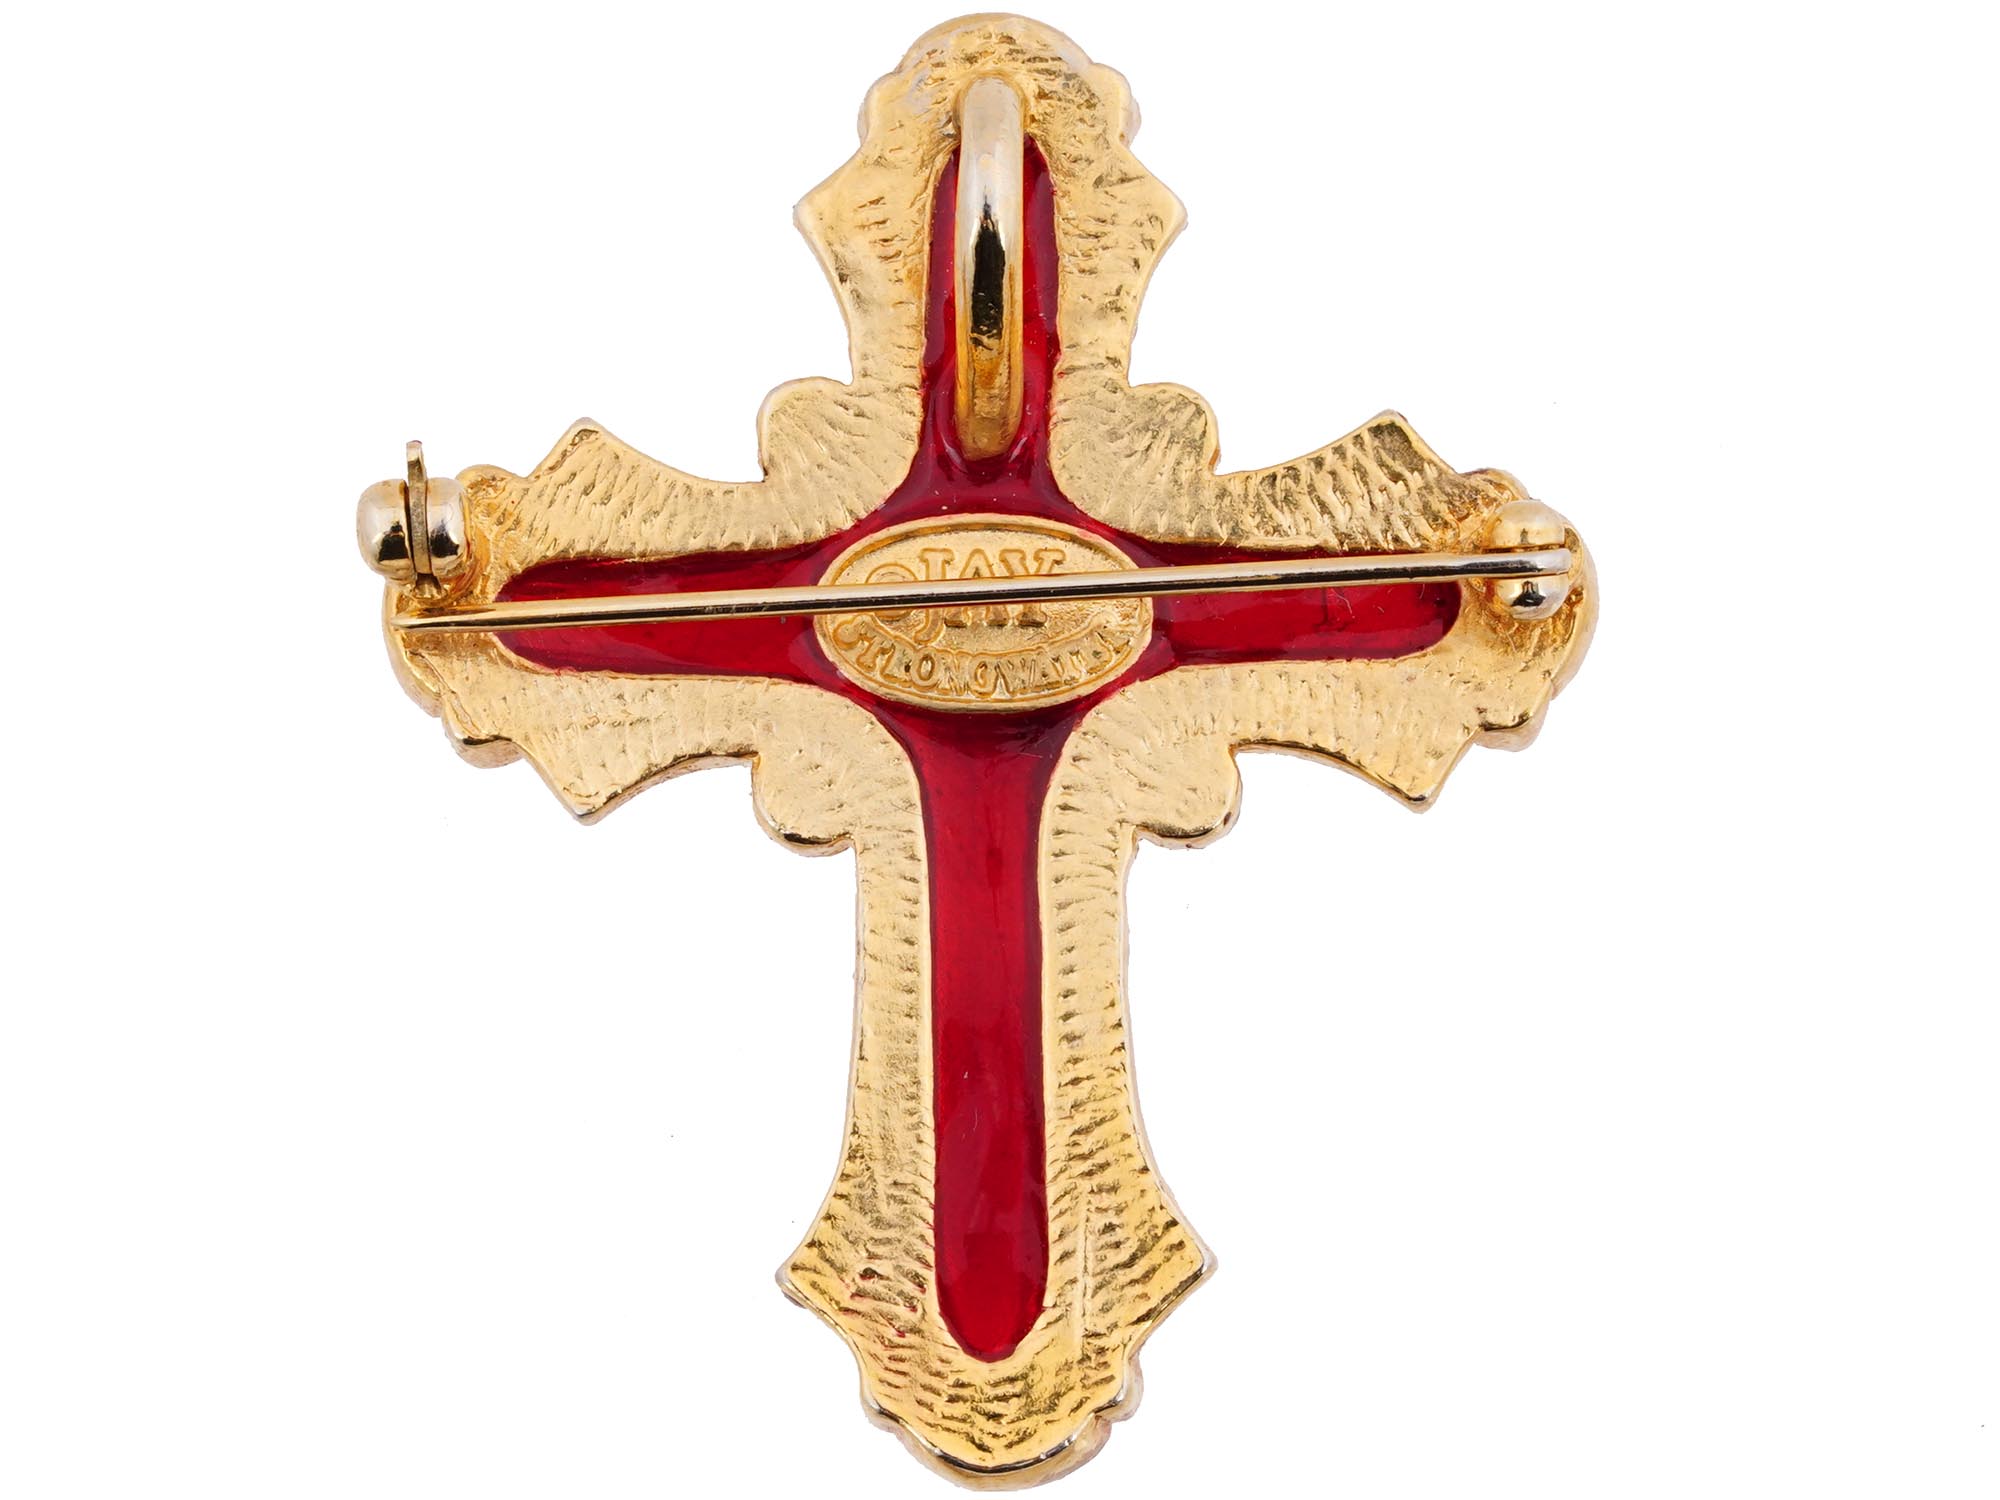 JAY STRONGWATER RED CRYSTAL CROSS BROOCH PENDANT PIC-2